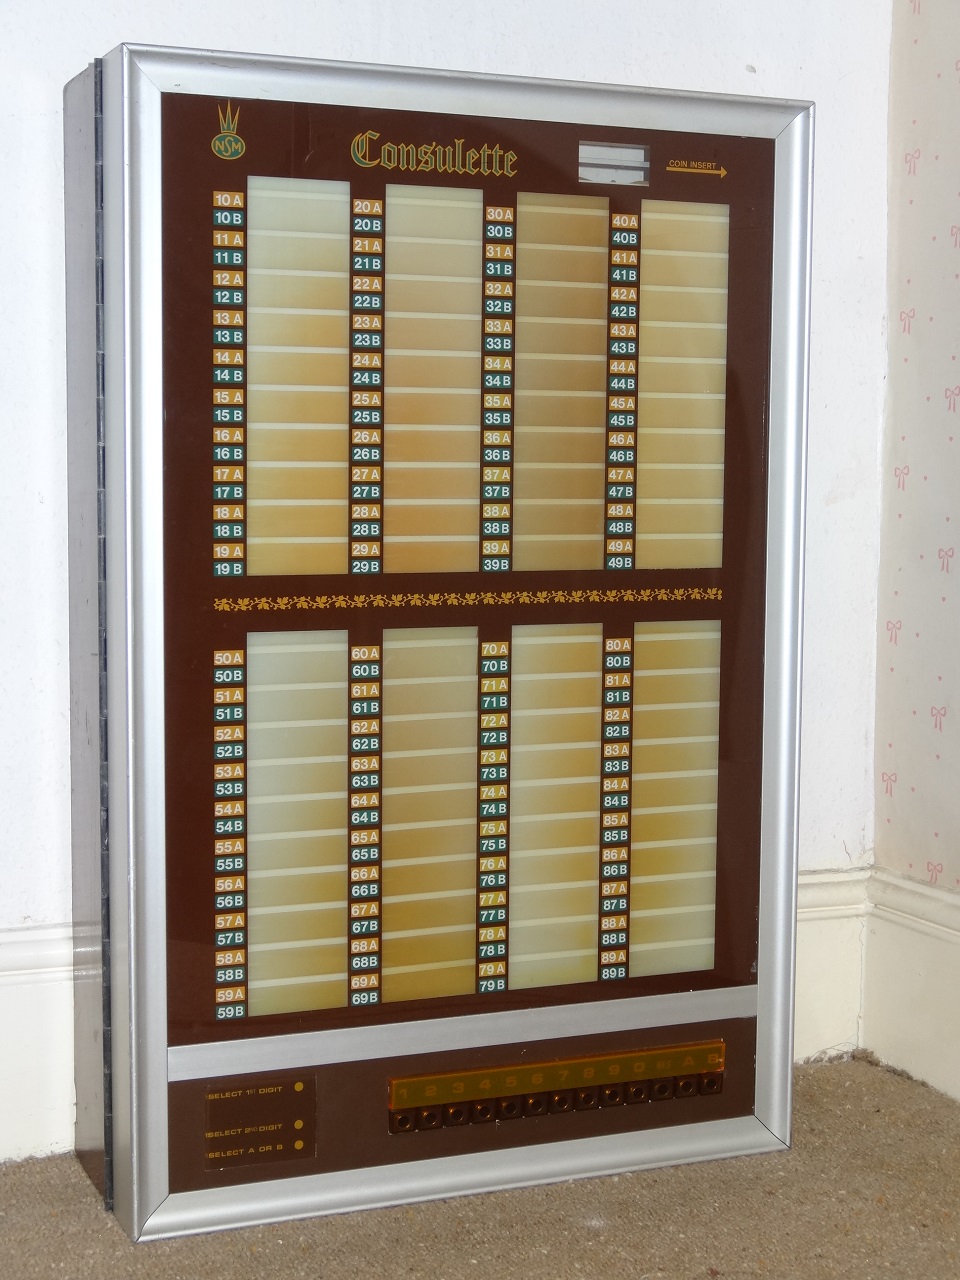 NSM NSM Consulette Jukebox Wallbox Appears To Be Complete See Full Description 